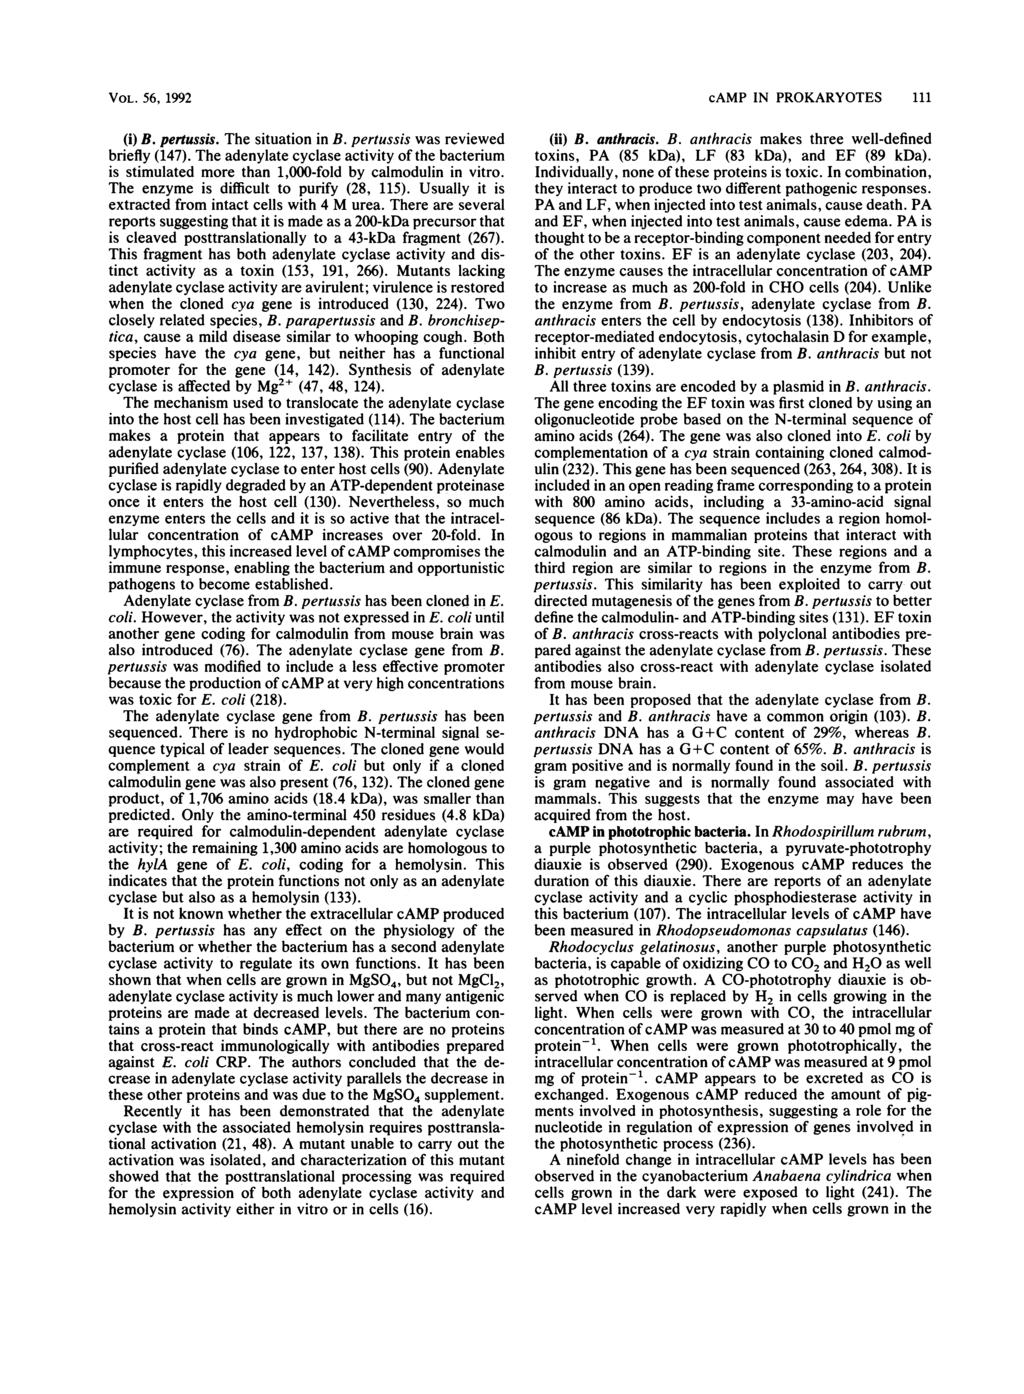 VOL. 56, 1992 (i) B. pertussis. The situation in B. pertussis was reviewed briefly (147). The adenylate cyclase activity of the bacterium is stimulated more than 1,000-fold by calmodulin in vitro.